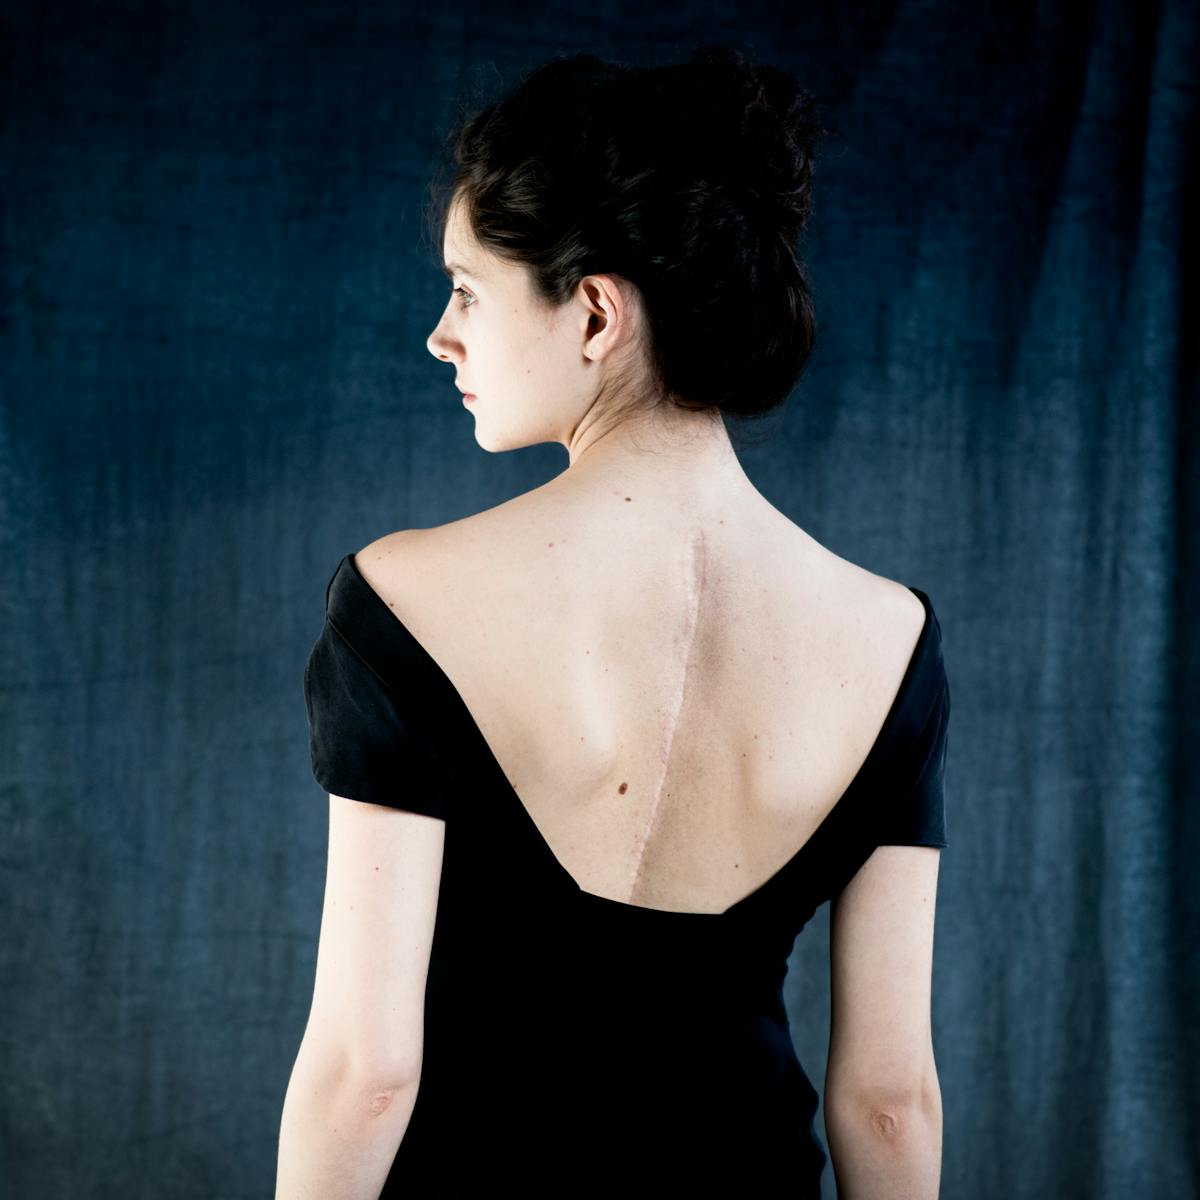 Photograph of a young woman from behind, from the waist up. Her head is turned to the left revealing her profile. She is wearing a low cut black dress which reveals a long scar following her spine. In the background are drapes of blue and white fabrics.